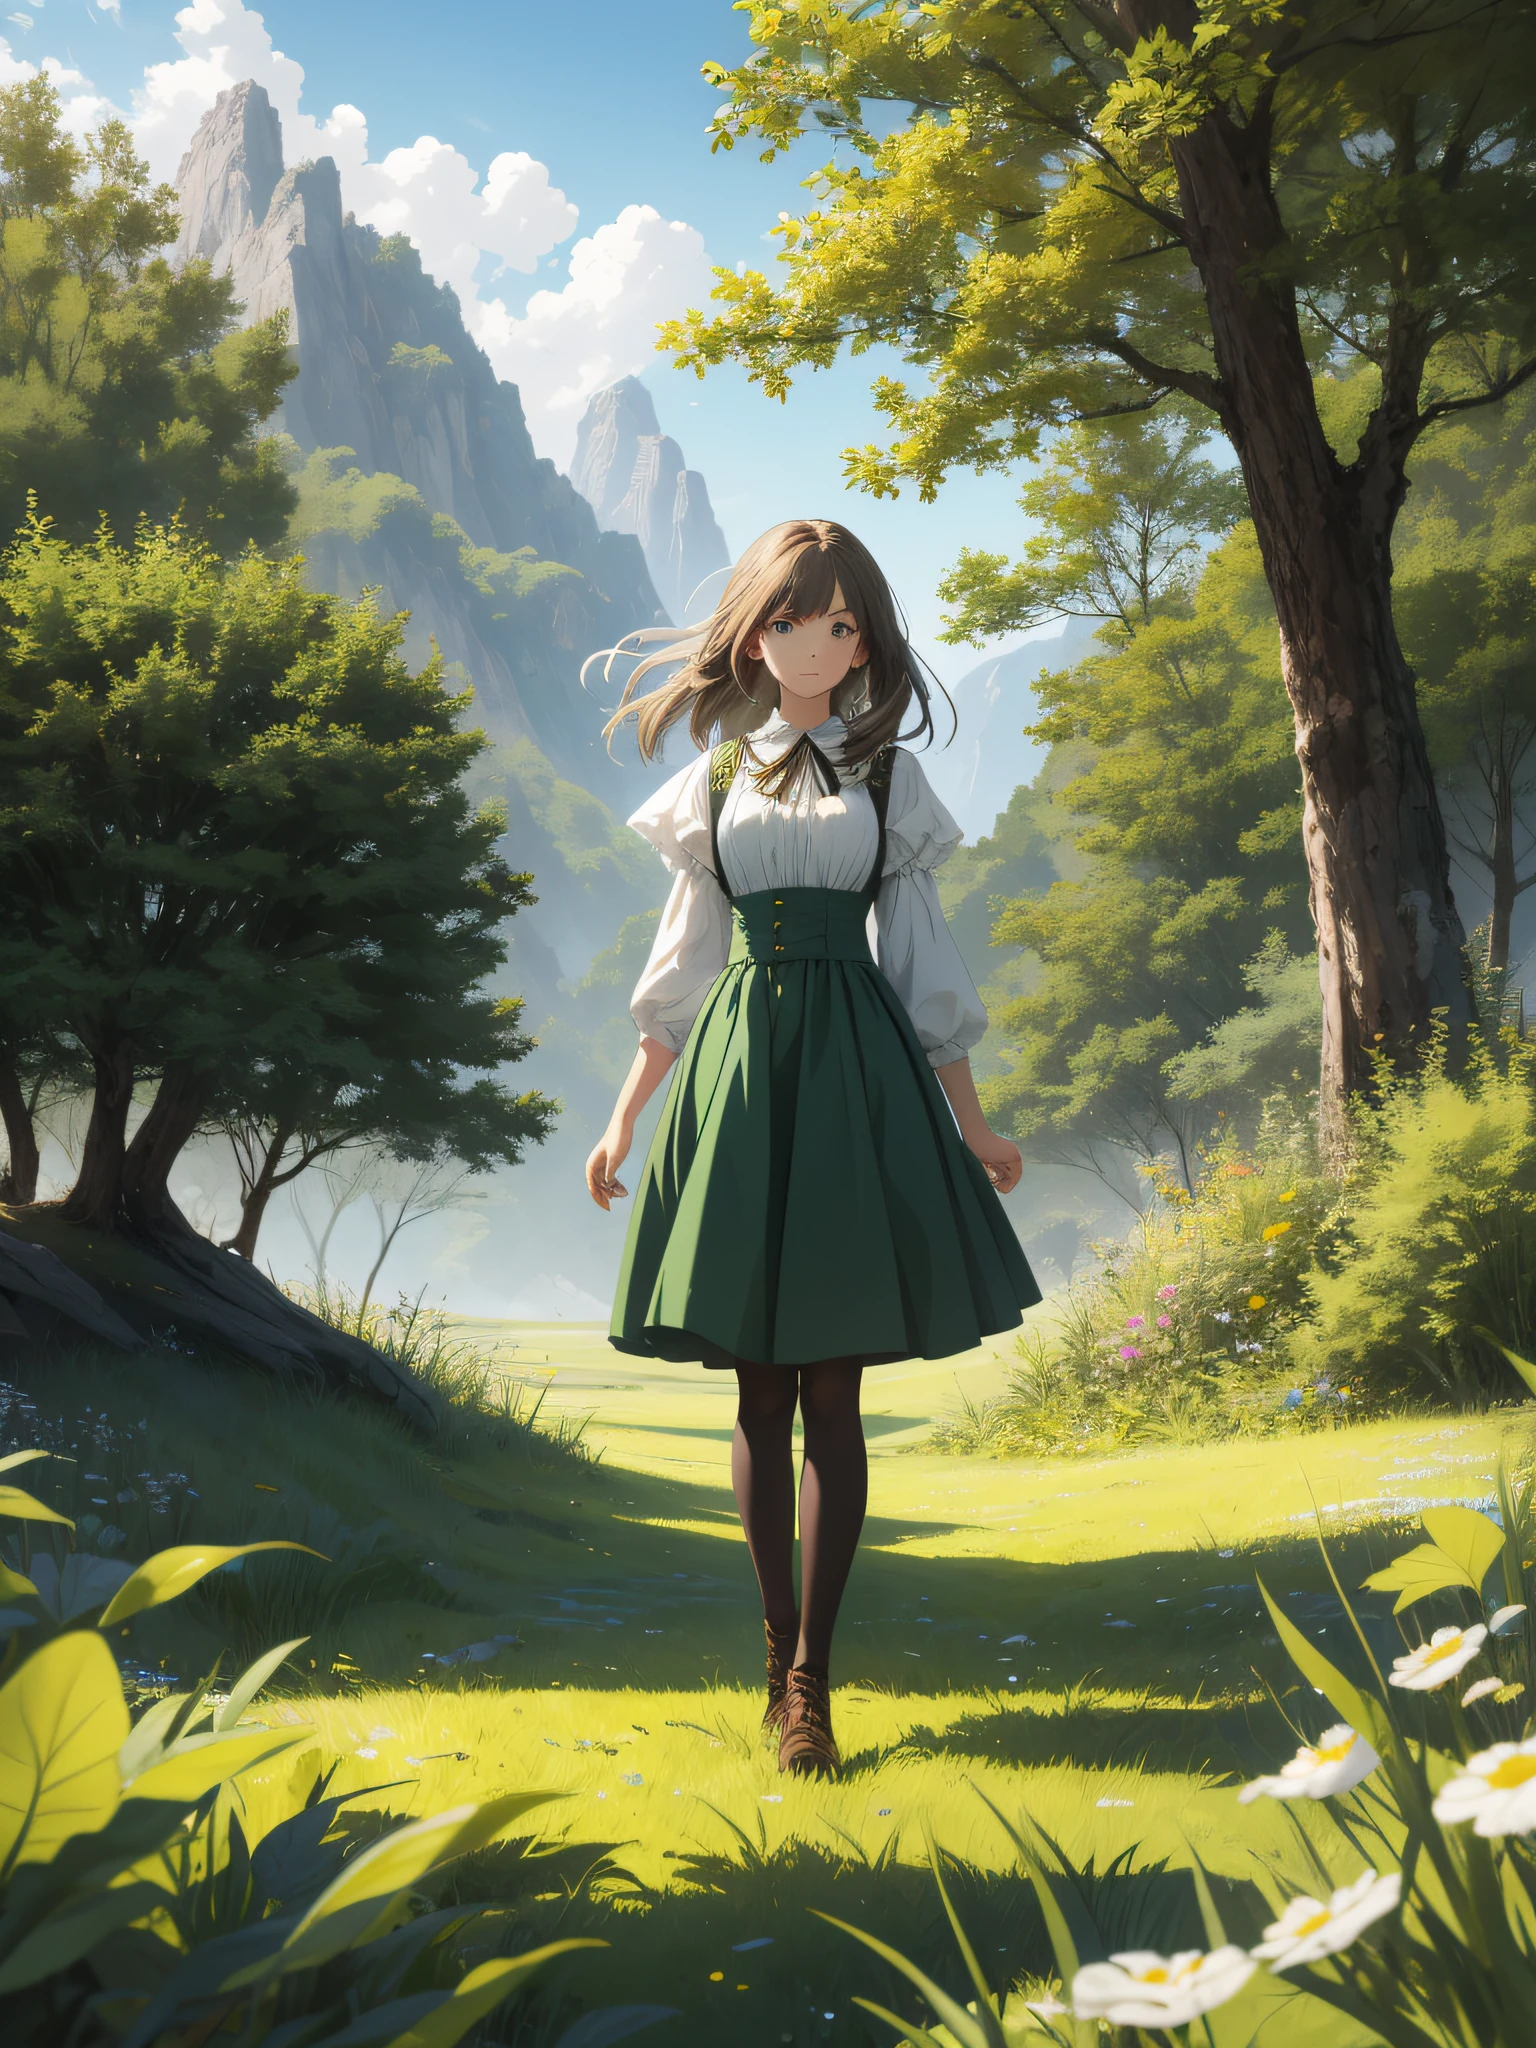 In a green meadow stands a girl leading a group of knights.
BREAK
With a brave expression, she guides them towards their destination.
BREAK
Behind her, a green forest stretches out and beyond that, mountains rise in the distance.
BREAK
The most suitable effect for this scene would be a watercolor painting technique to capture the softness of the meadow and the fluidity of the movement.